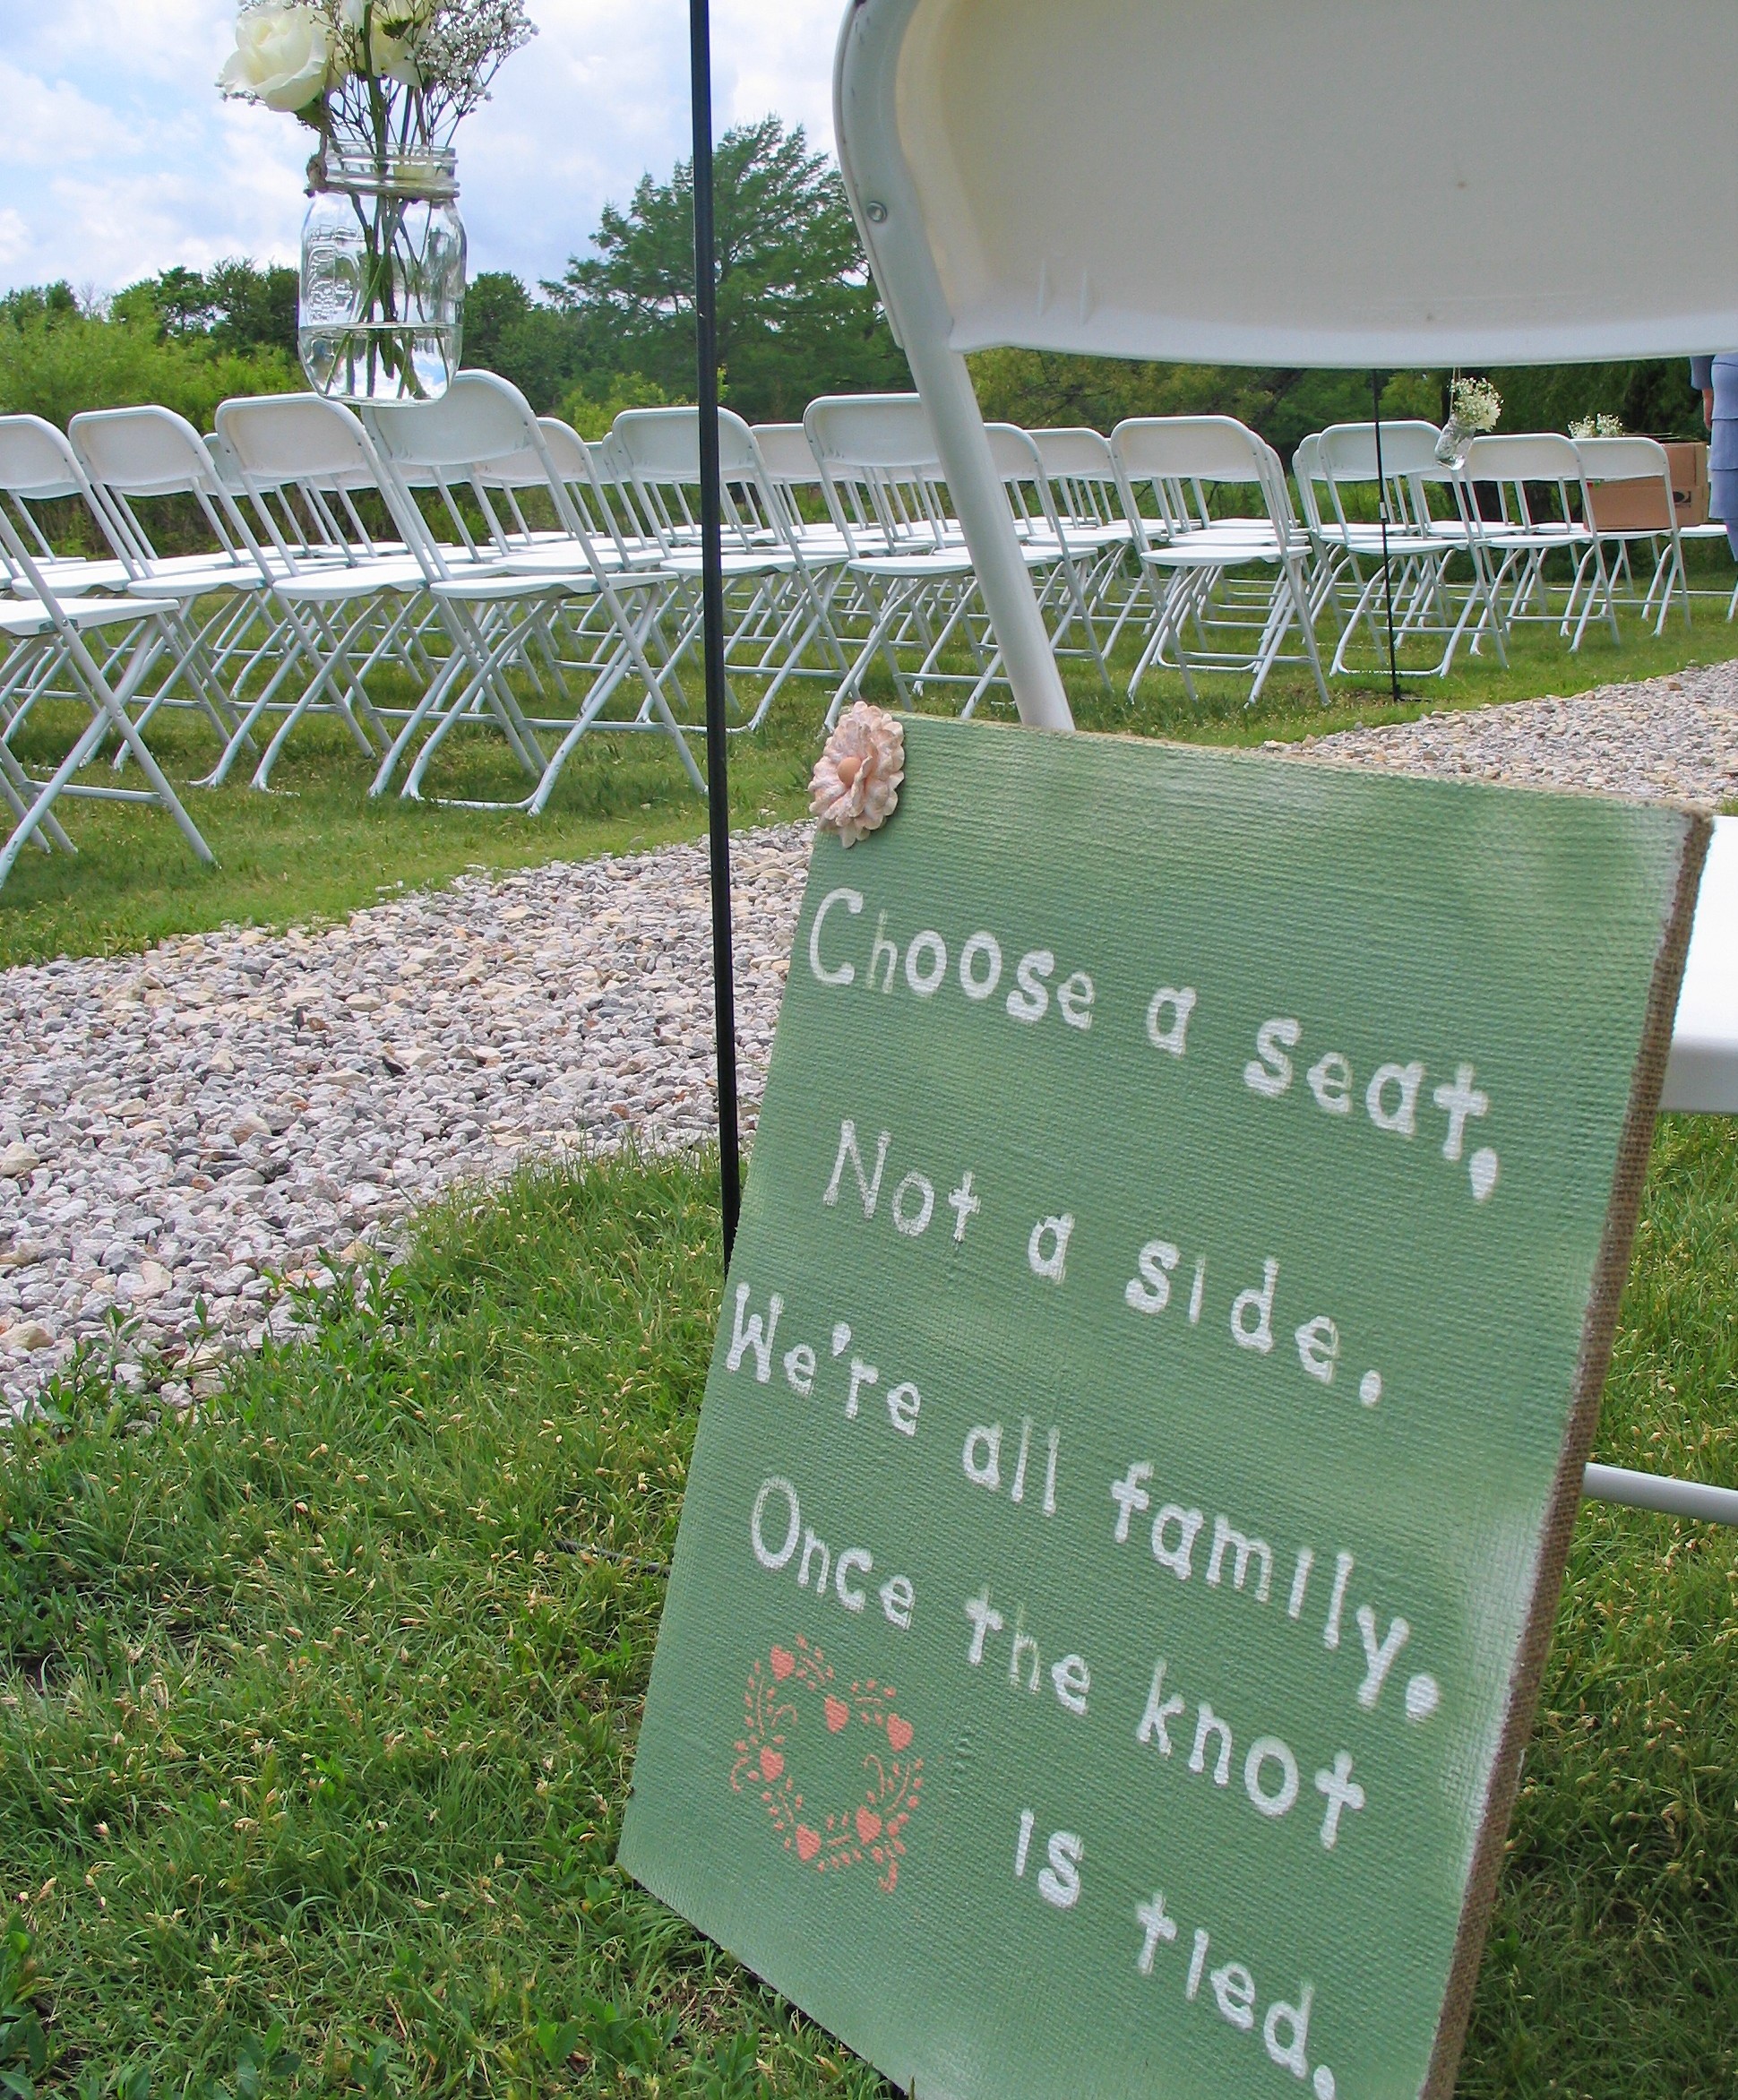 Choose a seat not a side wedding ceremony sign - rustic wedding